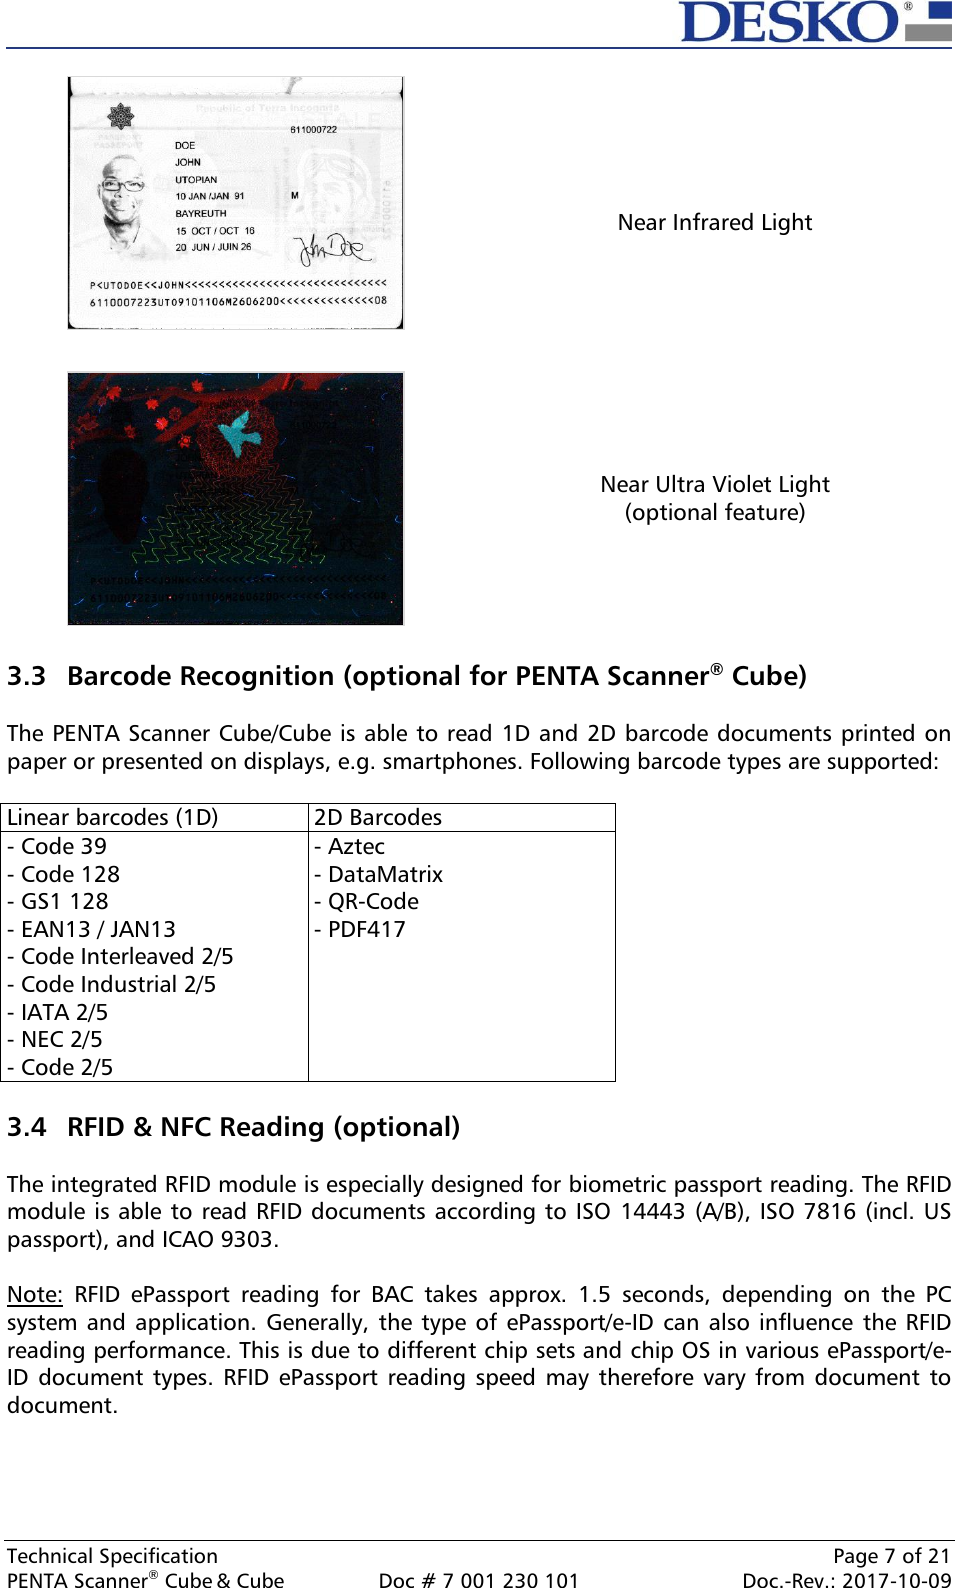  Technical Specification    Page 7 of 21 PENTA Scanner® Cube &amp; Cube  Doc # 7 001 230 101  Doc.-Rev.: 2017-10-09     Near Infrared Light  Near Ultra Violet Light (optional feature)  3.3 Barcode Recognition (optional for PENTA Scanner® Cube)  The PENTA Scanner Cube/Cube is able to read 1D and 2D barcode documents printed on paper or presented on displays, e.g. smartphones. Following barcode types are supported:  Linear barcodes (1D) 2D Barcodes - Code 39 - Code 128 - GS1 128 - EAN13 / JAN13 - Code Interleaved 2/5 - Code Industrial 2/5 - IATA 2/5 - NEC 2/5 - Code 2/5 - Aztec - DataMatrix - QR-Code - PDF417   3.4 RFID &amp; NFC Reading (optional)  The integrated RFID module is especially designed for biometric passport reading. The RFID module is able to read RFID documents according to ISO  14443 (A/B), ISO 7816 (incl. US passport), and ICAO 9303.  Note:  RFID  ePassport  reading  for  BAC  takes  approx.  1.5  seconds,  depending  on  the  PC system and  application. Generally,  the type of  ePassport/e-ID can  also influence  the RFID reading performance. This is due to different chip sets and chip OS in various ePassport/e-ID  document  types. RFID ePassport reading  speed may  therefore vary  from document  to document.    